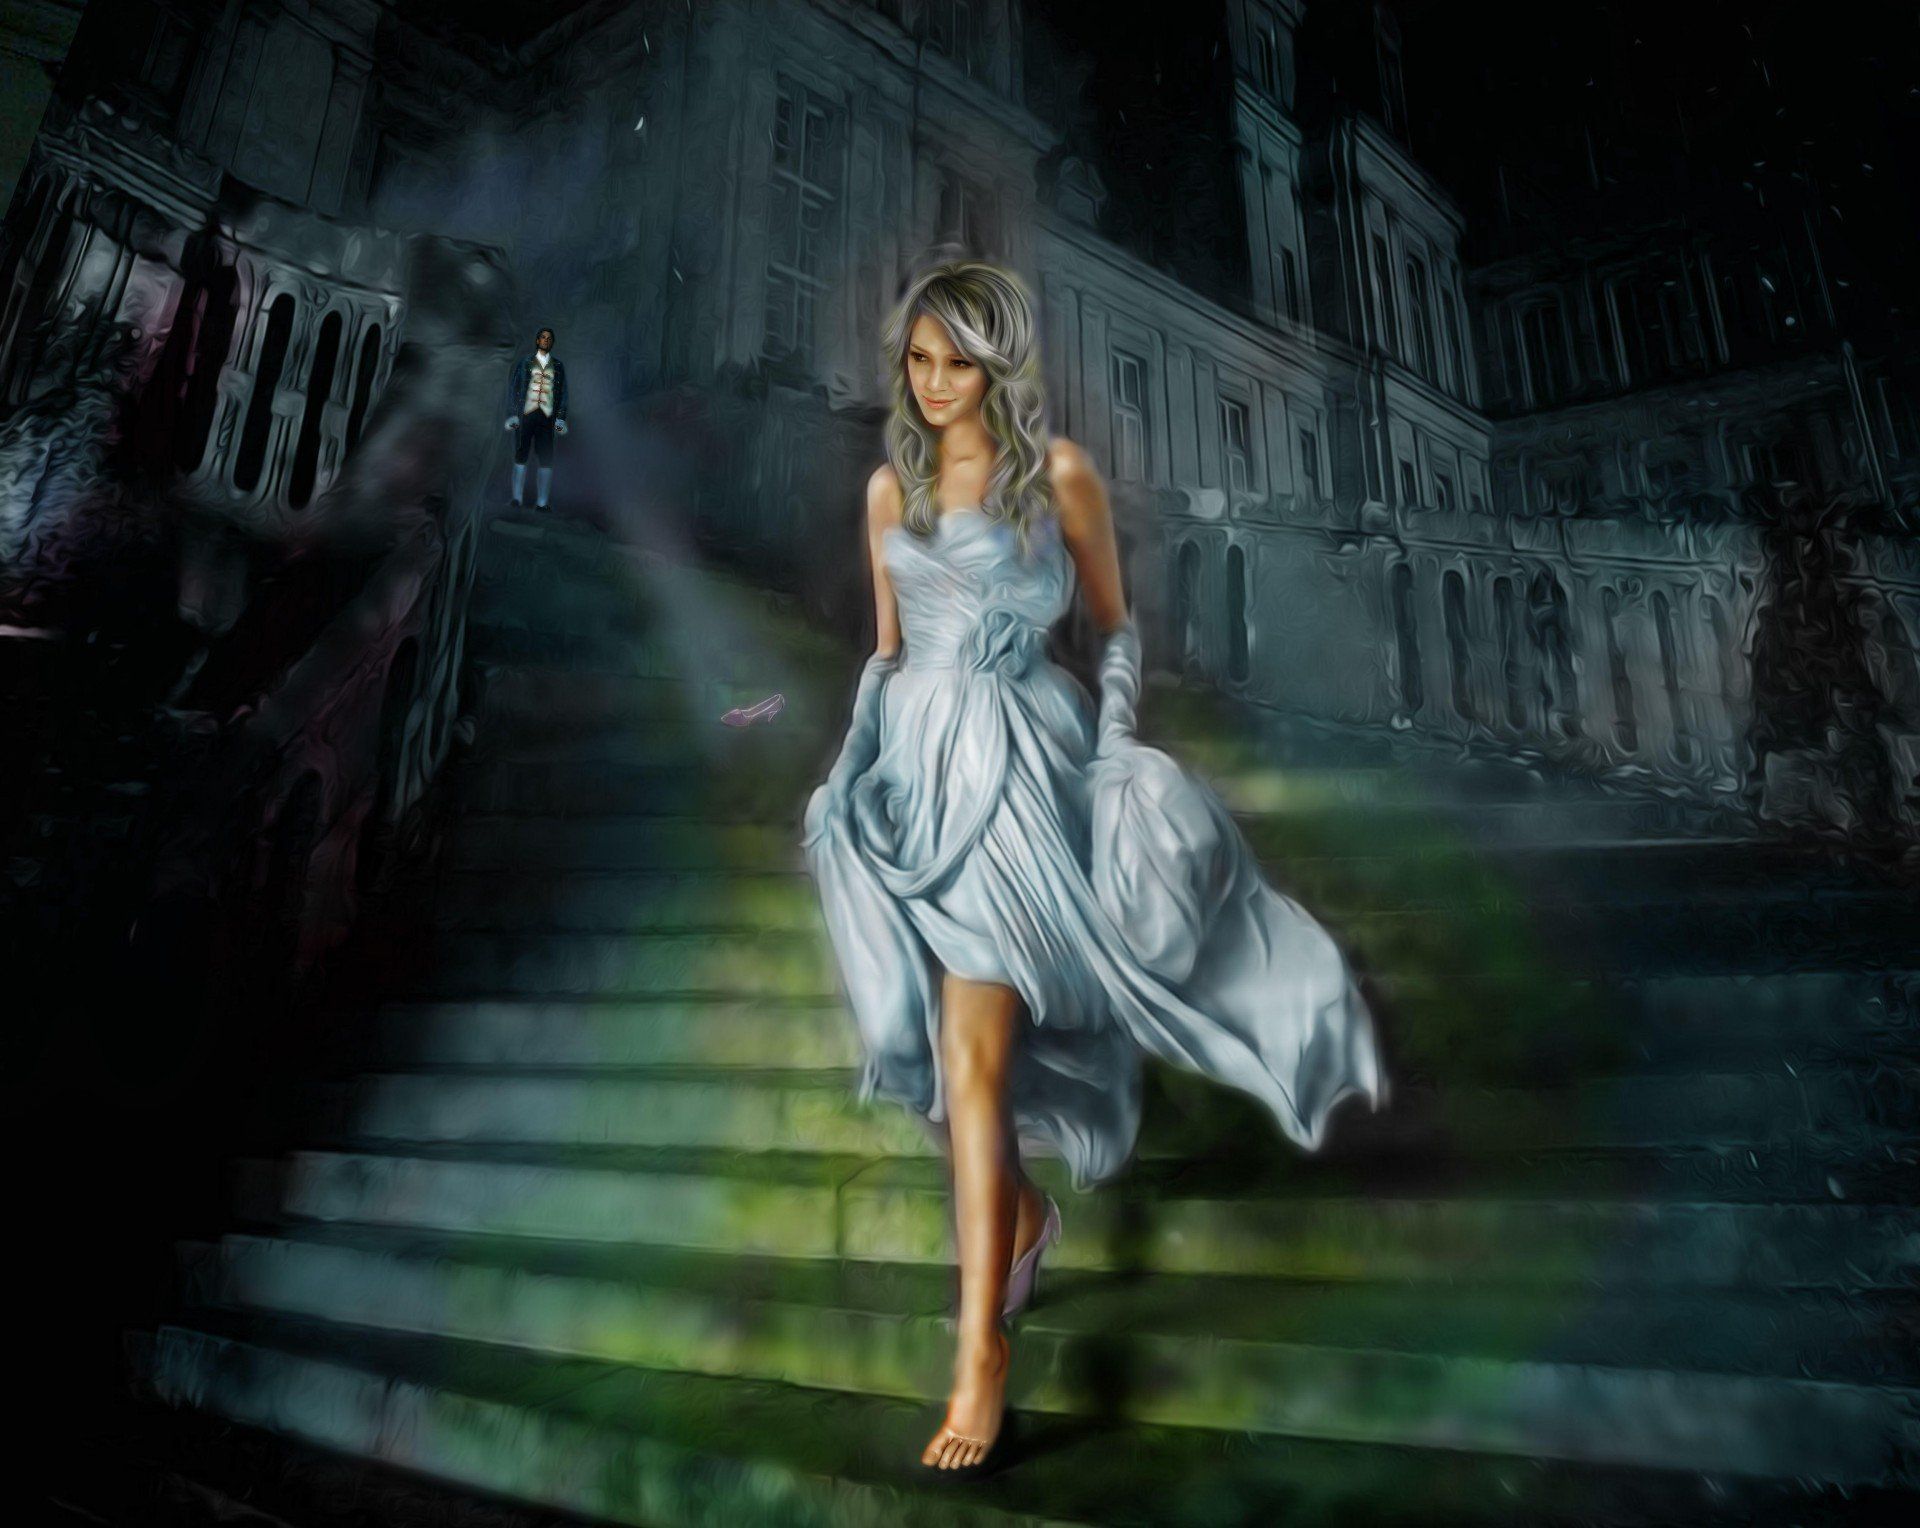 foot cinderella stairs tanks HD wallpaper for computer or android device. Digital art fantasy, Cinderella wallpaper, Cinderella art